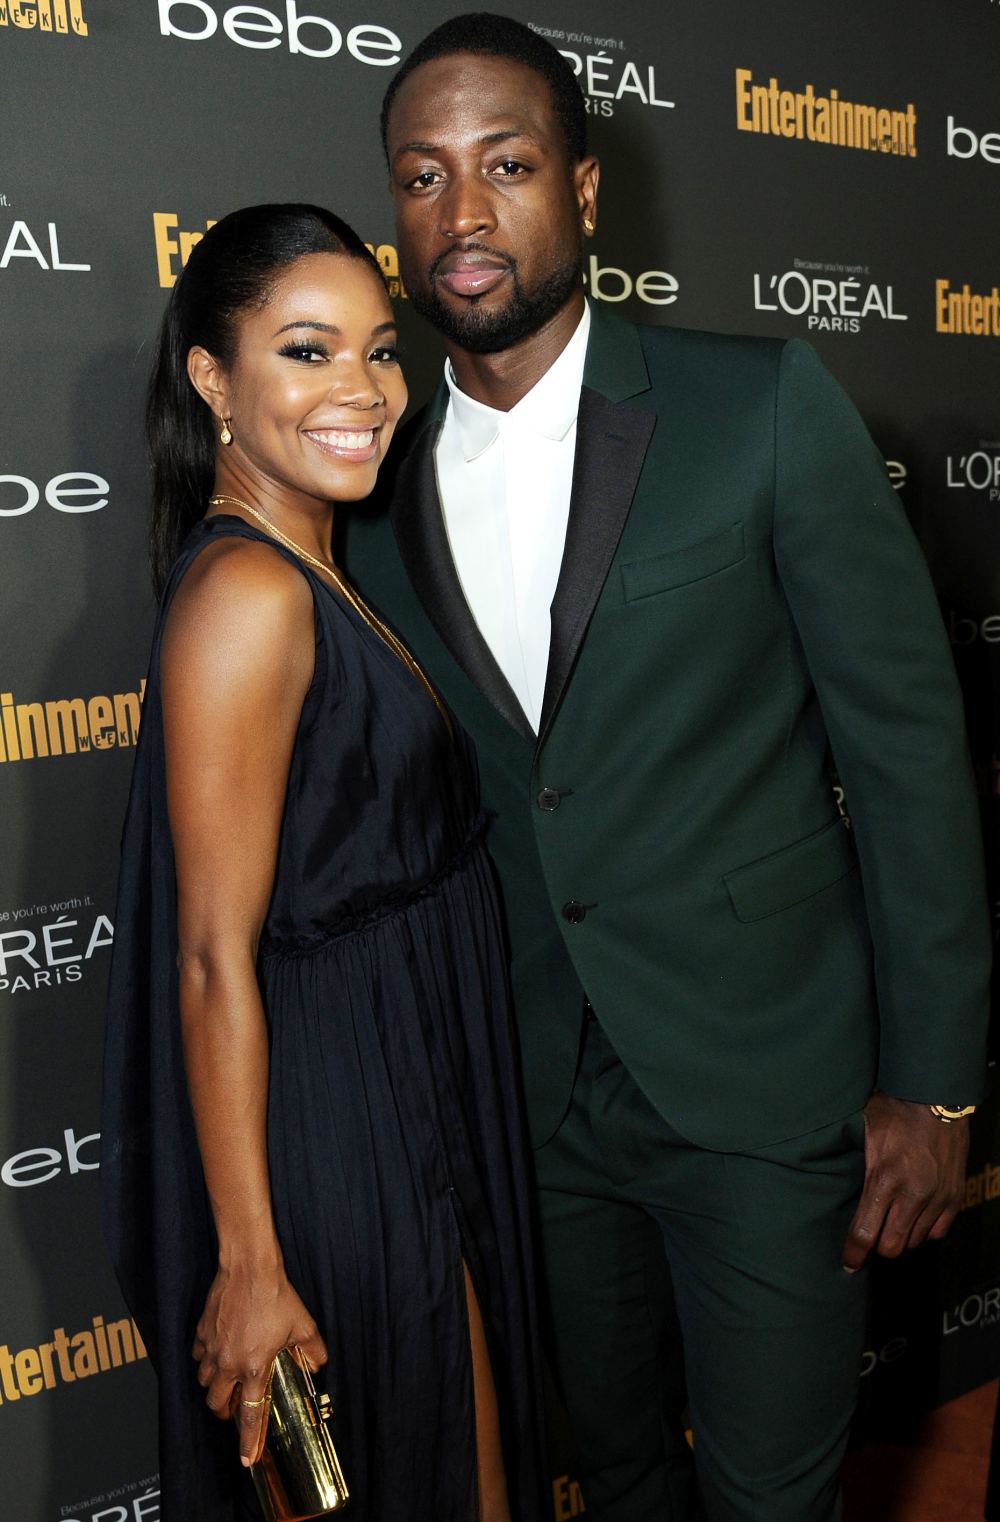 Dwayne Wade Gabrielle Union Role-Play to Keep Their Marriage Fresh